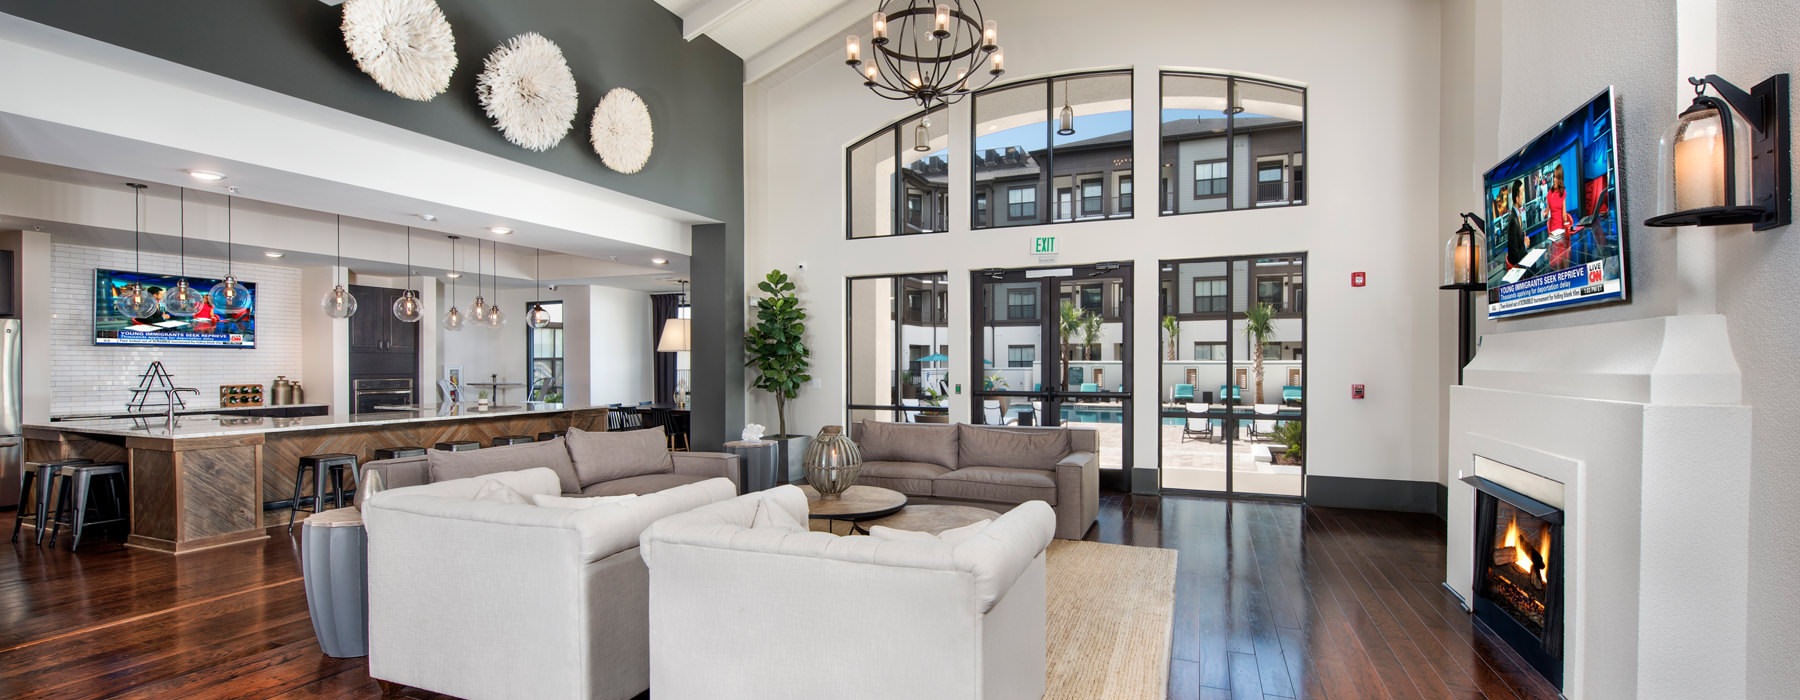 Open clubhouse with high ceilings, wood floors, and community kitchen